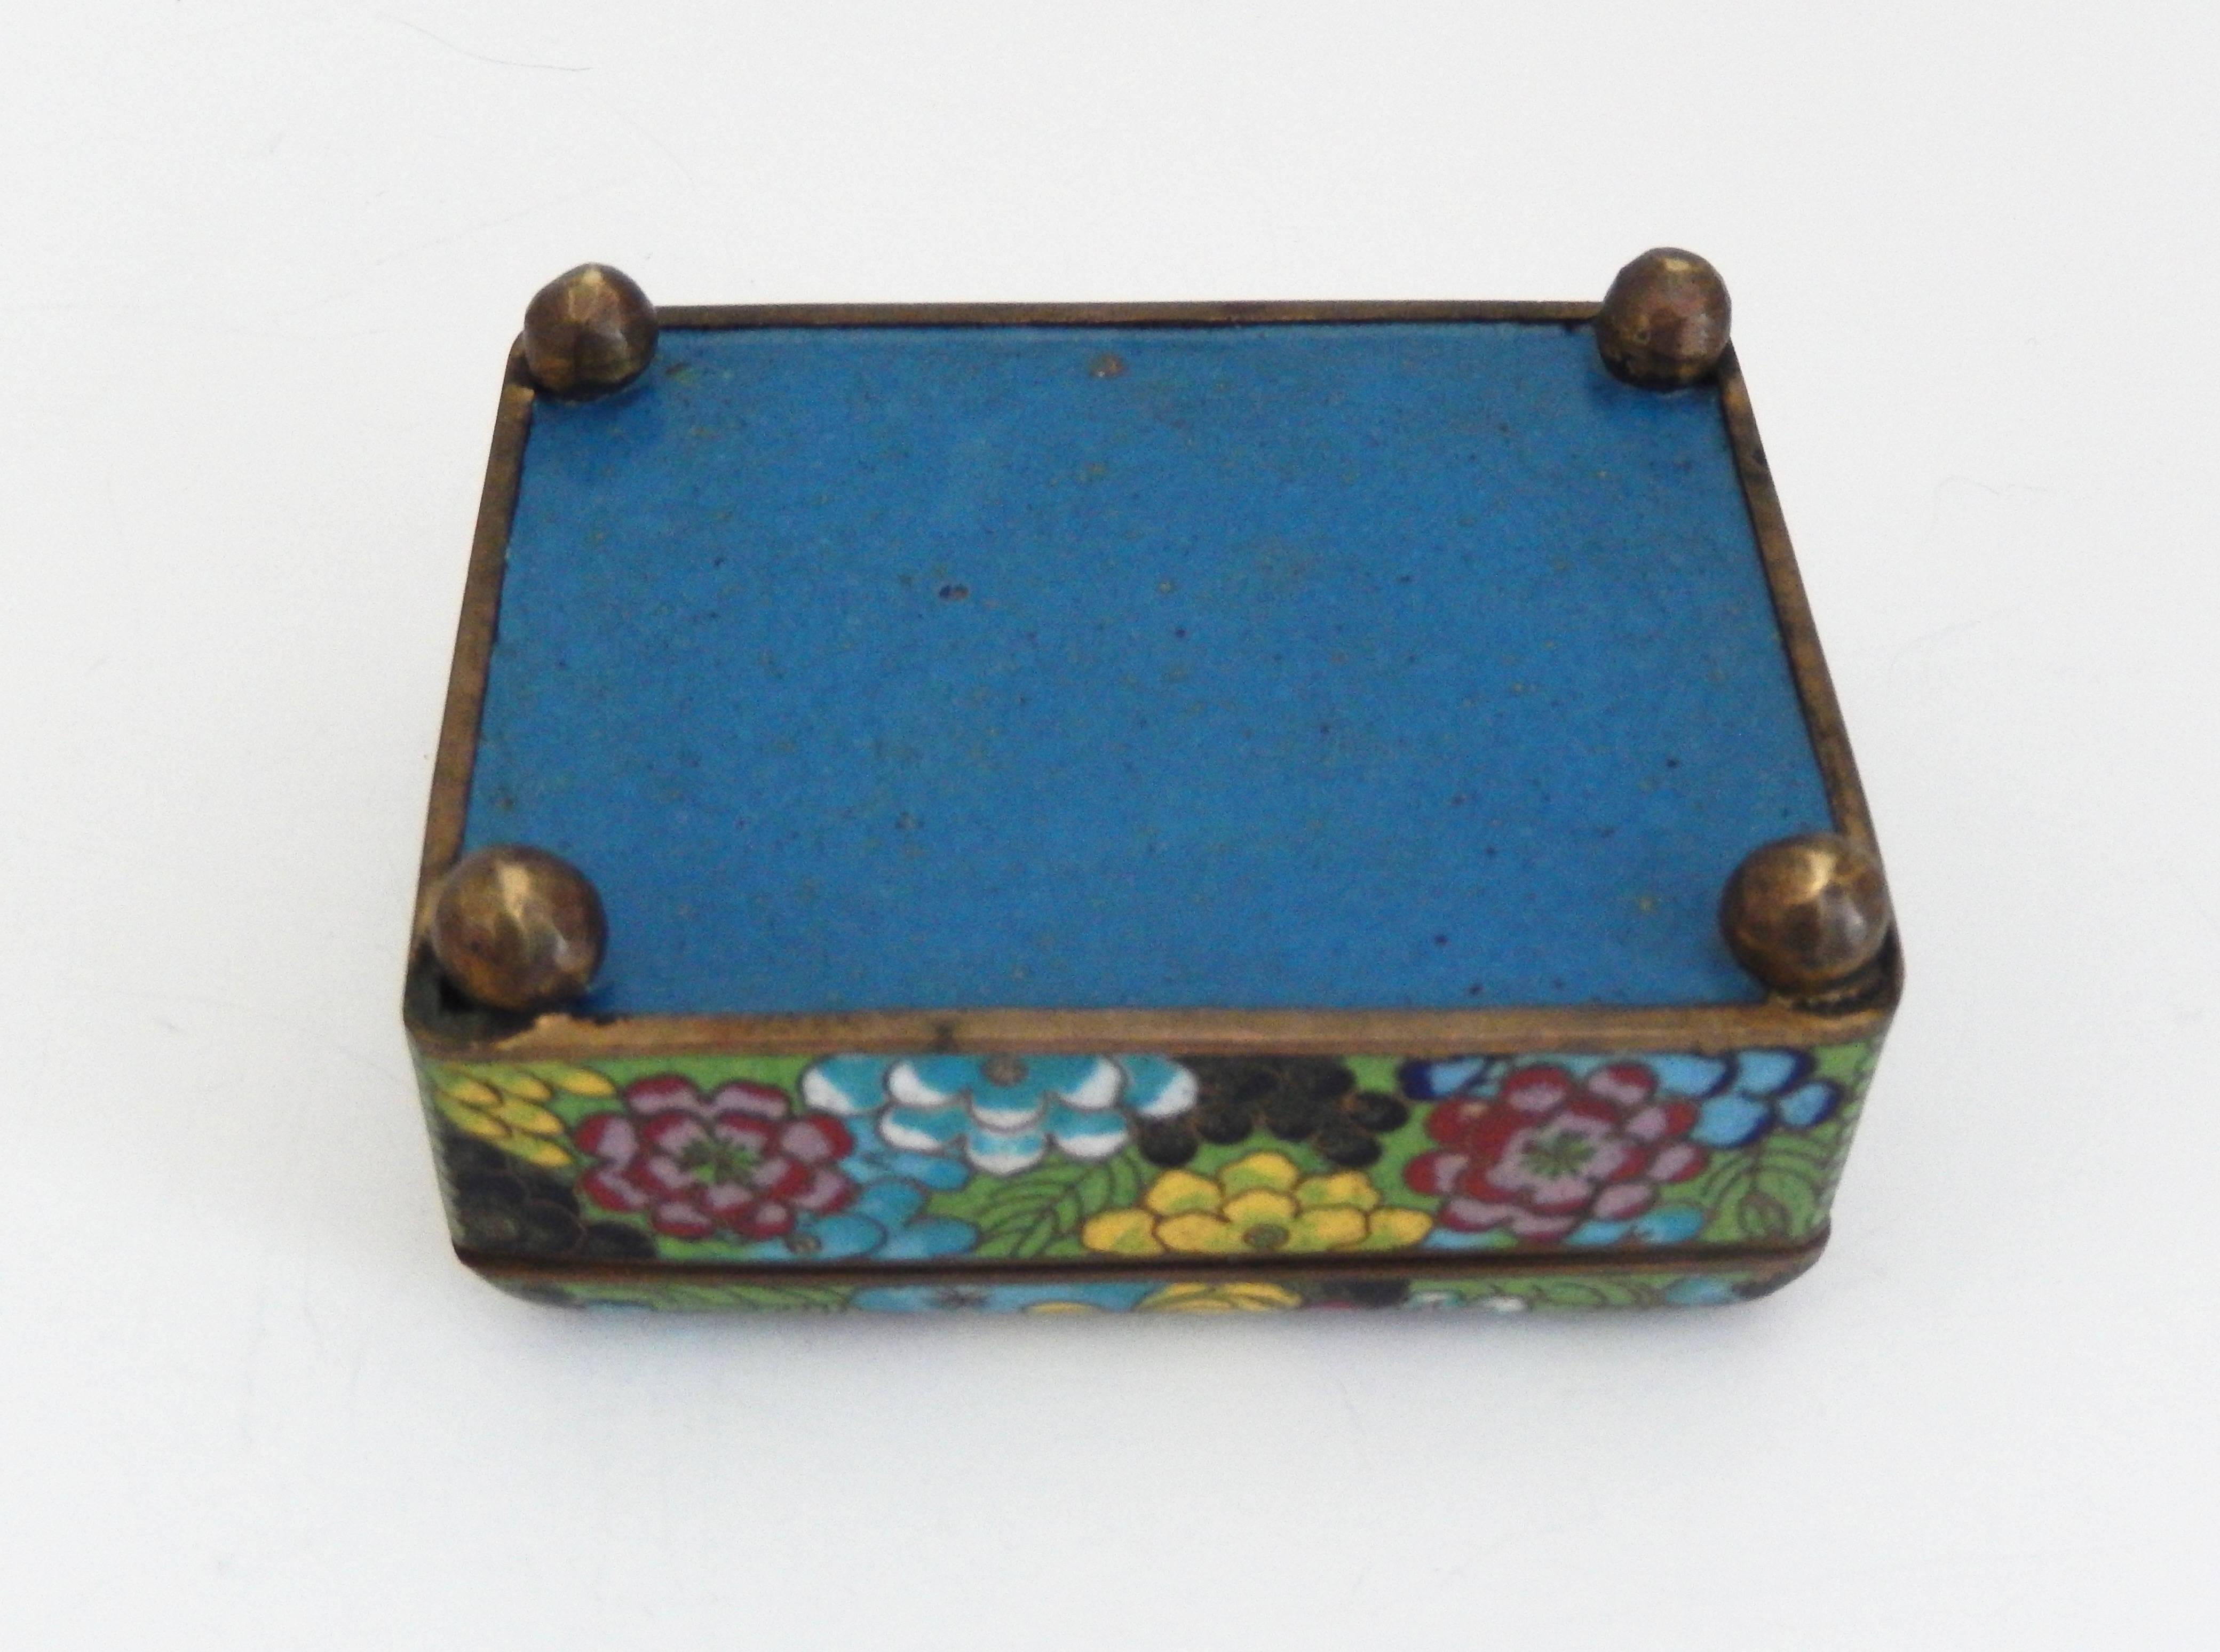 Vintage Cloisonné Cigarette Box and Match Holder with Floral Motif In Good Condition For Sale In Winnetka, IL